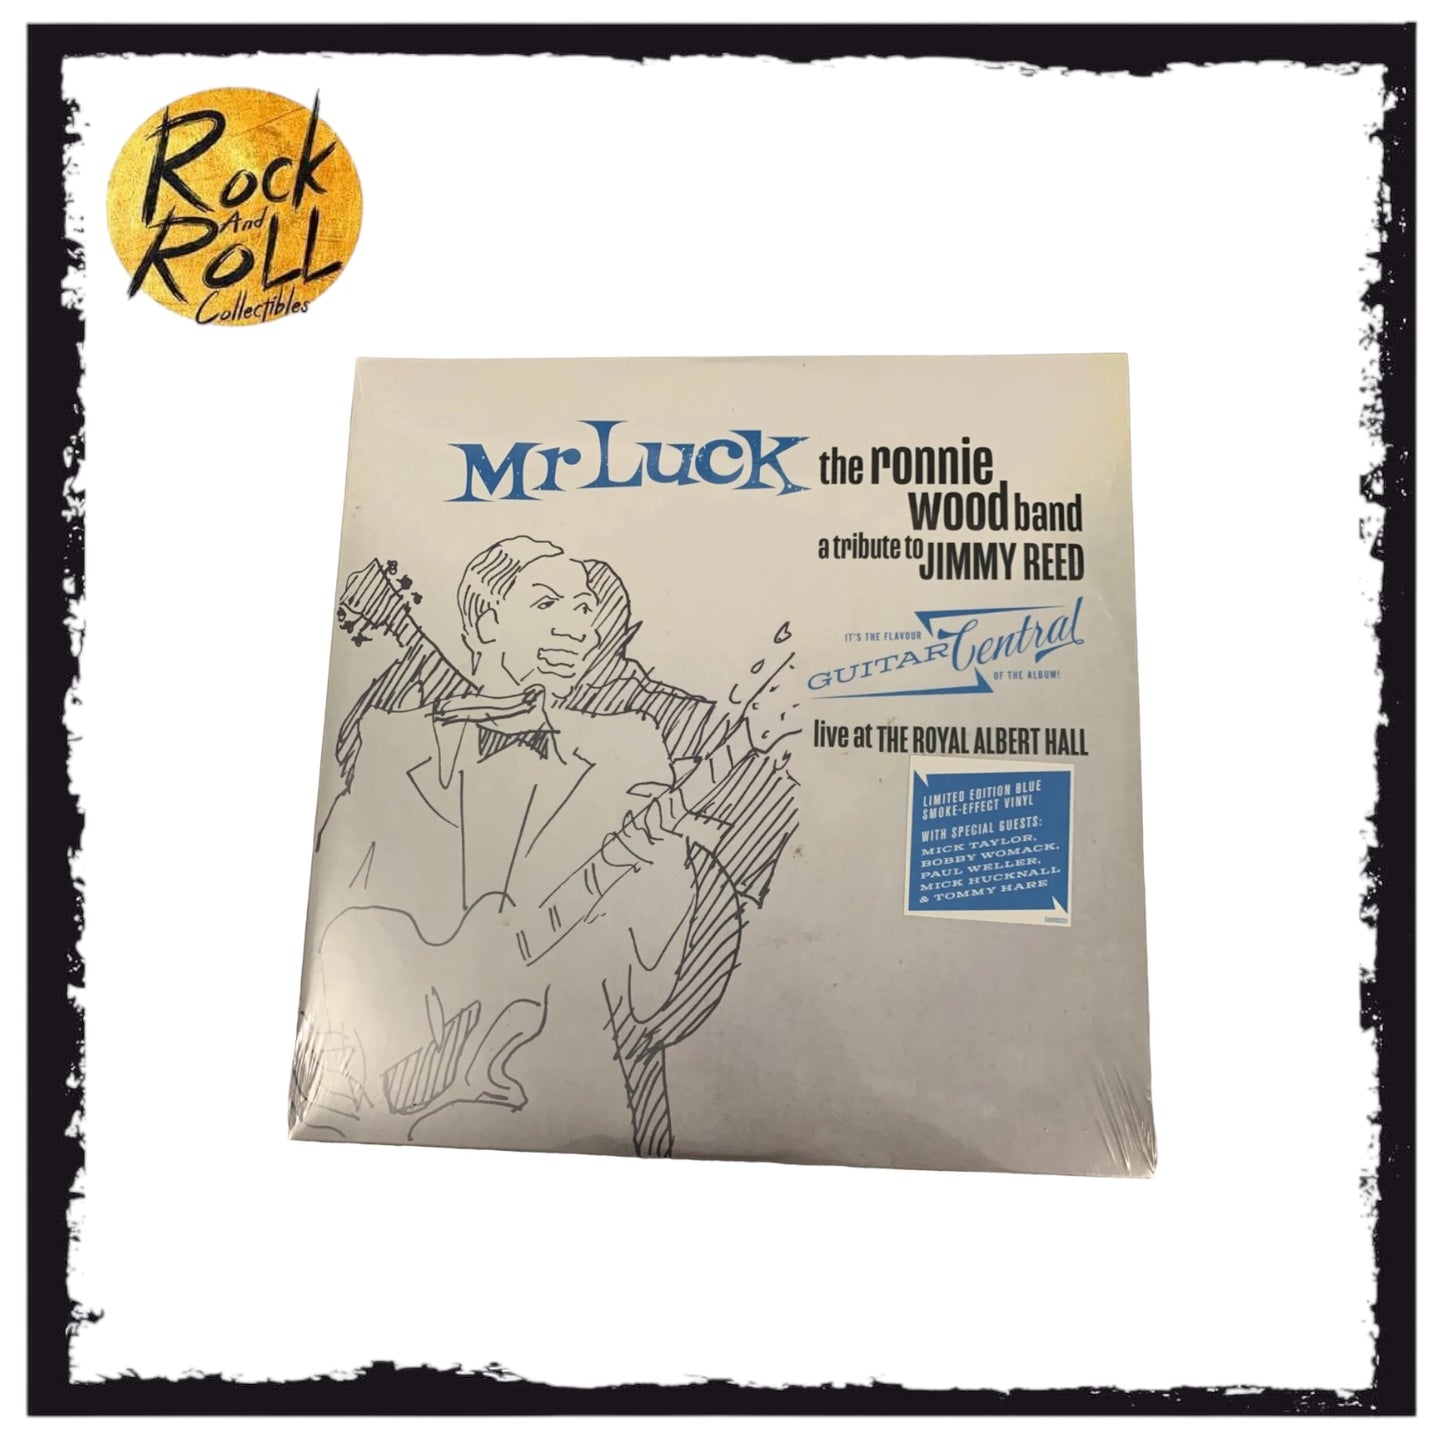 Ronnie Wood Band - Mr Luck, A Tribute To Jimmy Reed. Double Blue Vinyl